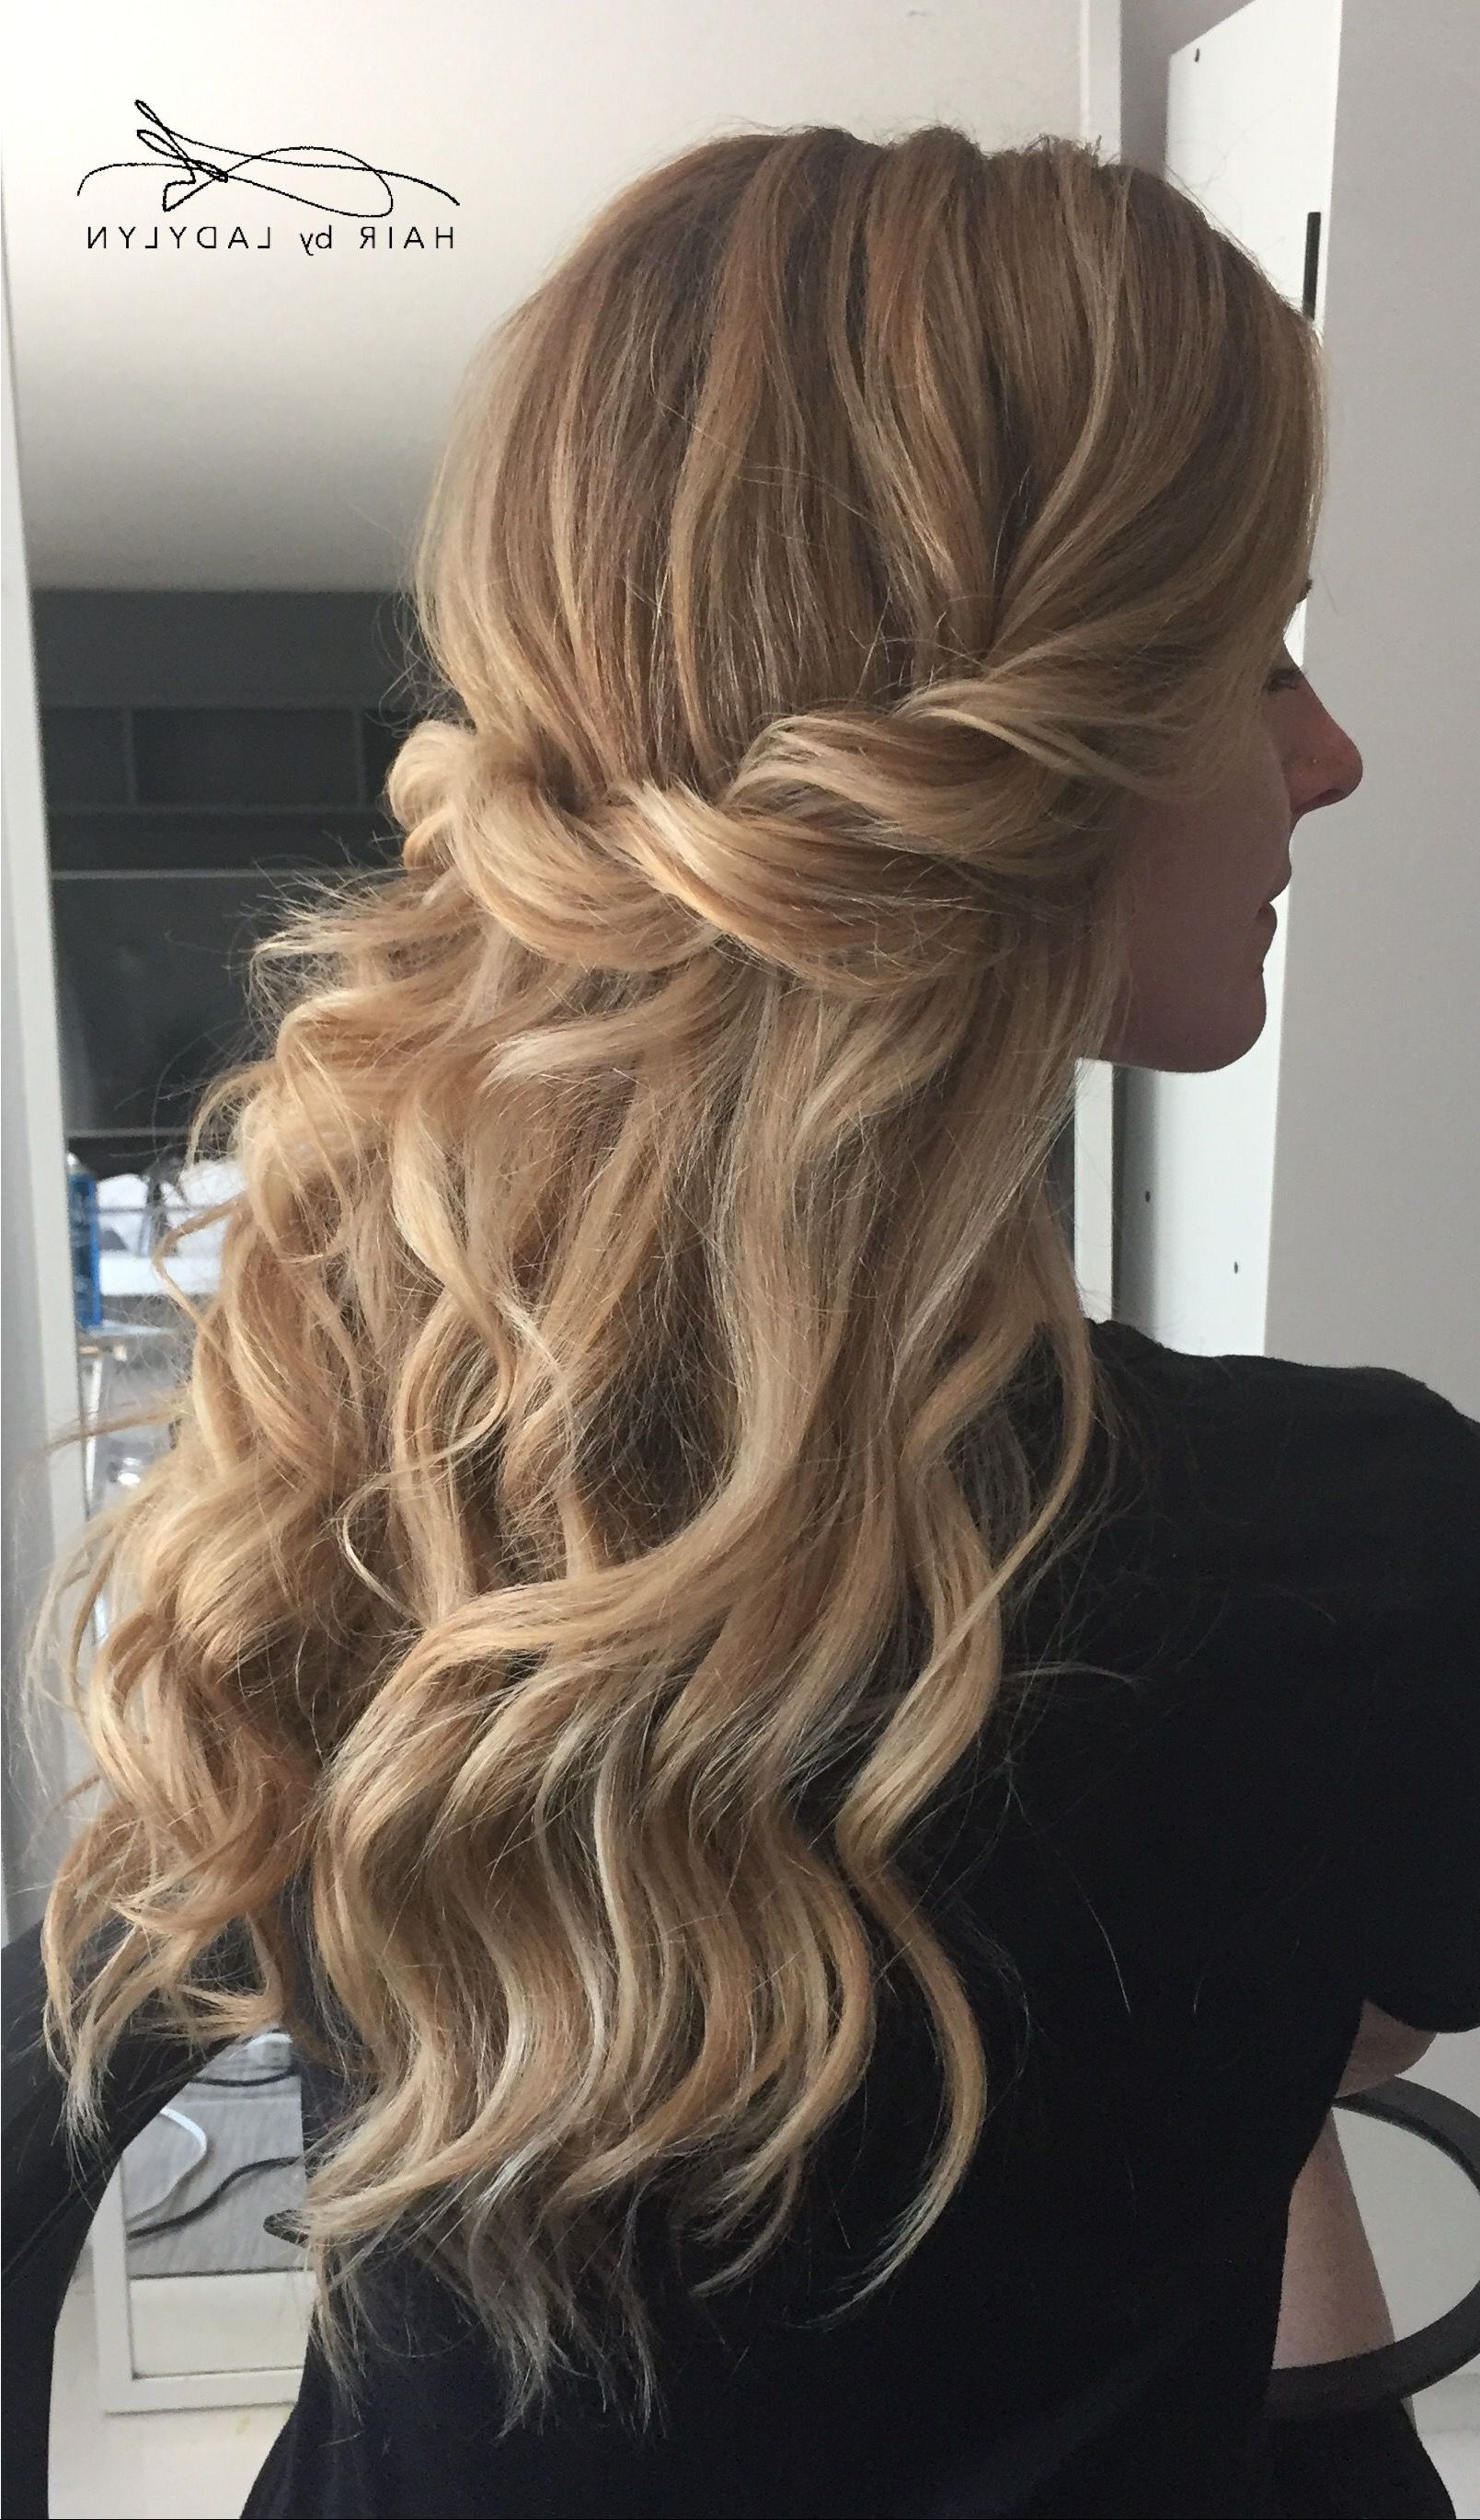 Boho Wedding Hair Blonde Long Loose Beach Waves Half Up Highlights In Most Current Dimensional Waves In Half Up Wedding Hairstyles (View 5 of 20)